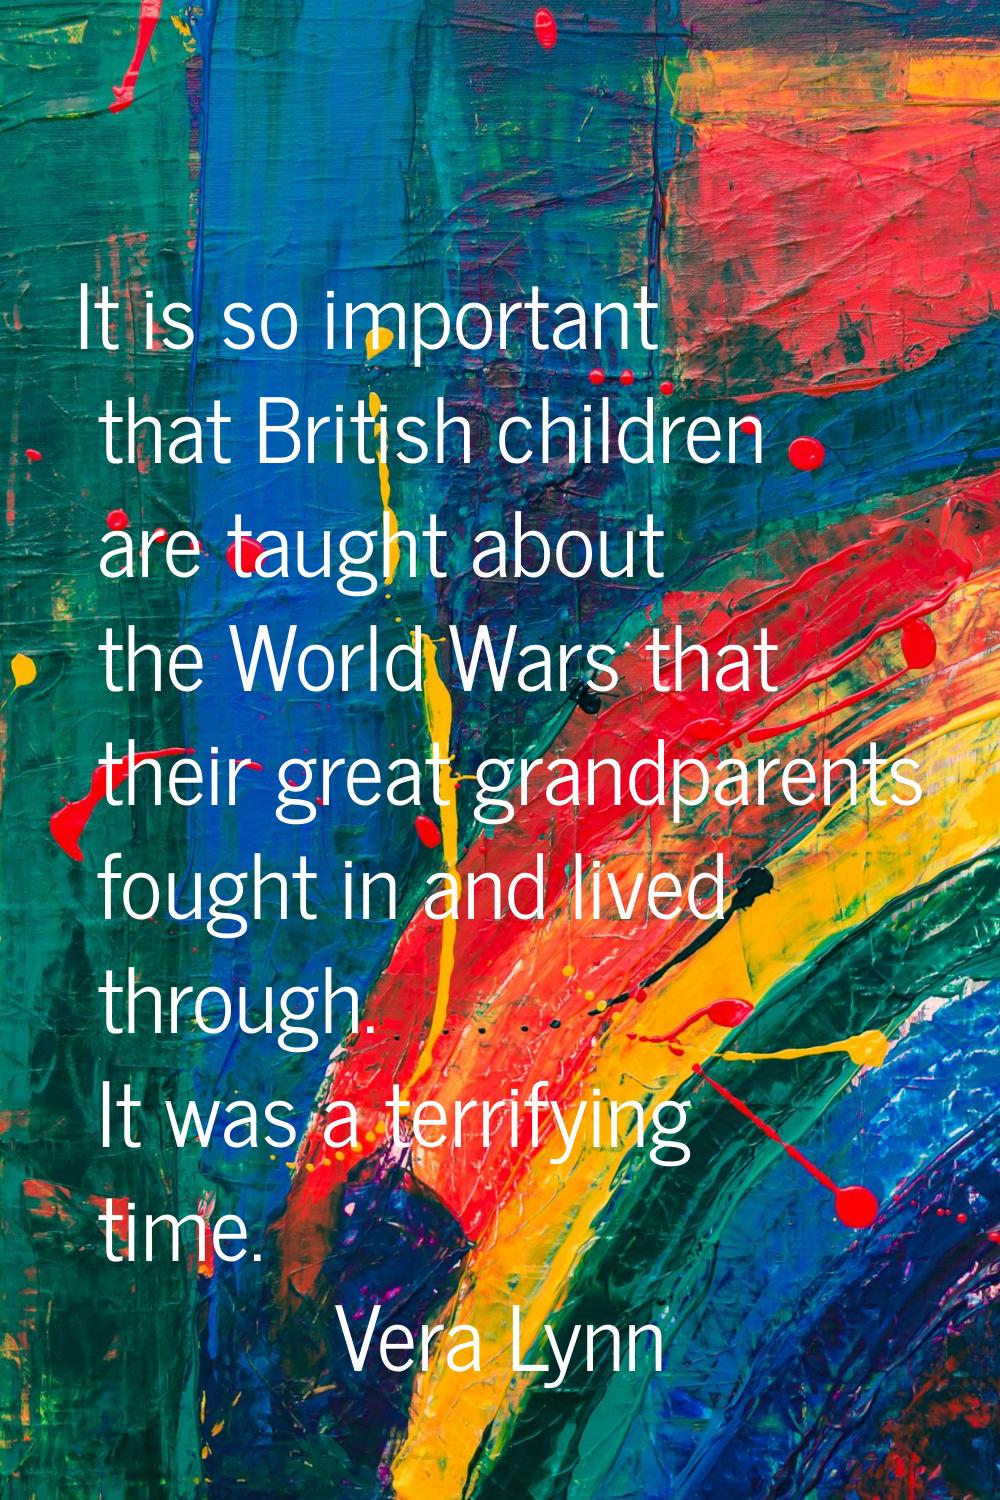 It is so important that British children are taught about the World Wars that their great grandpare